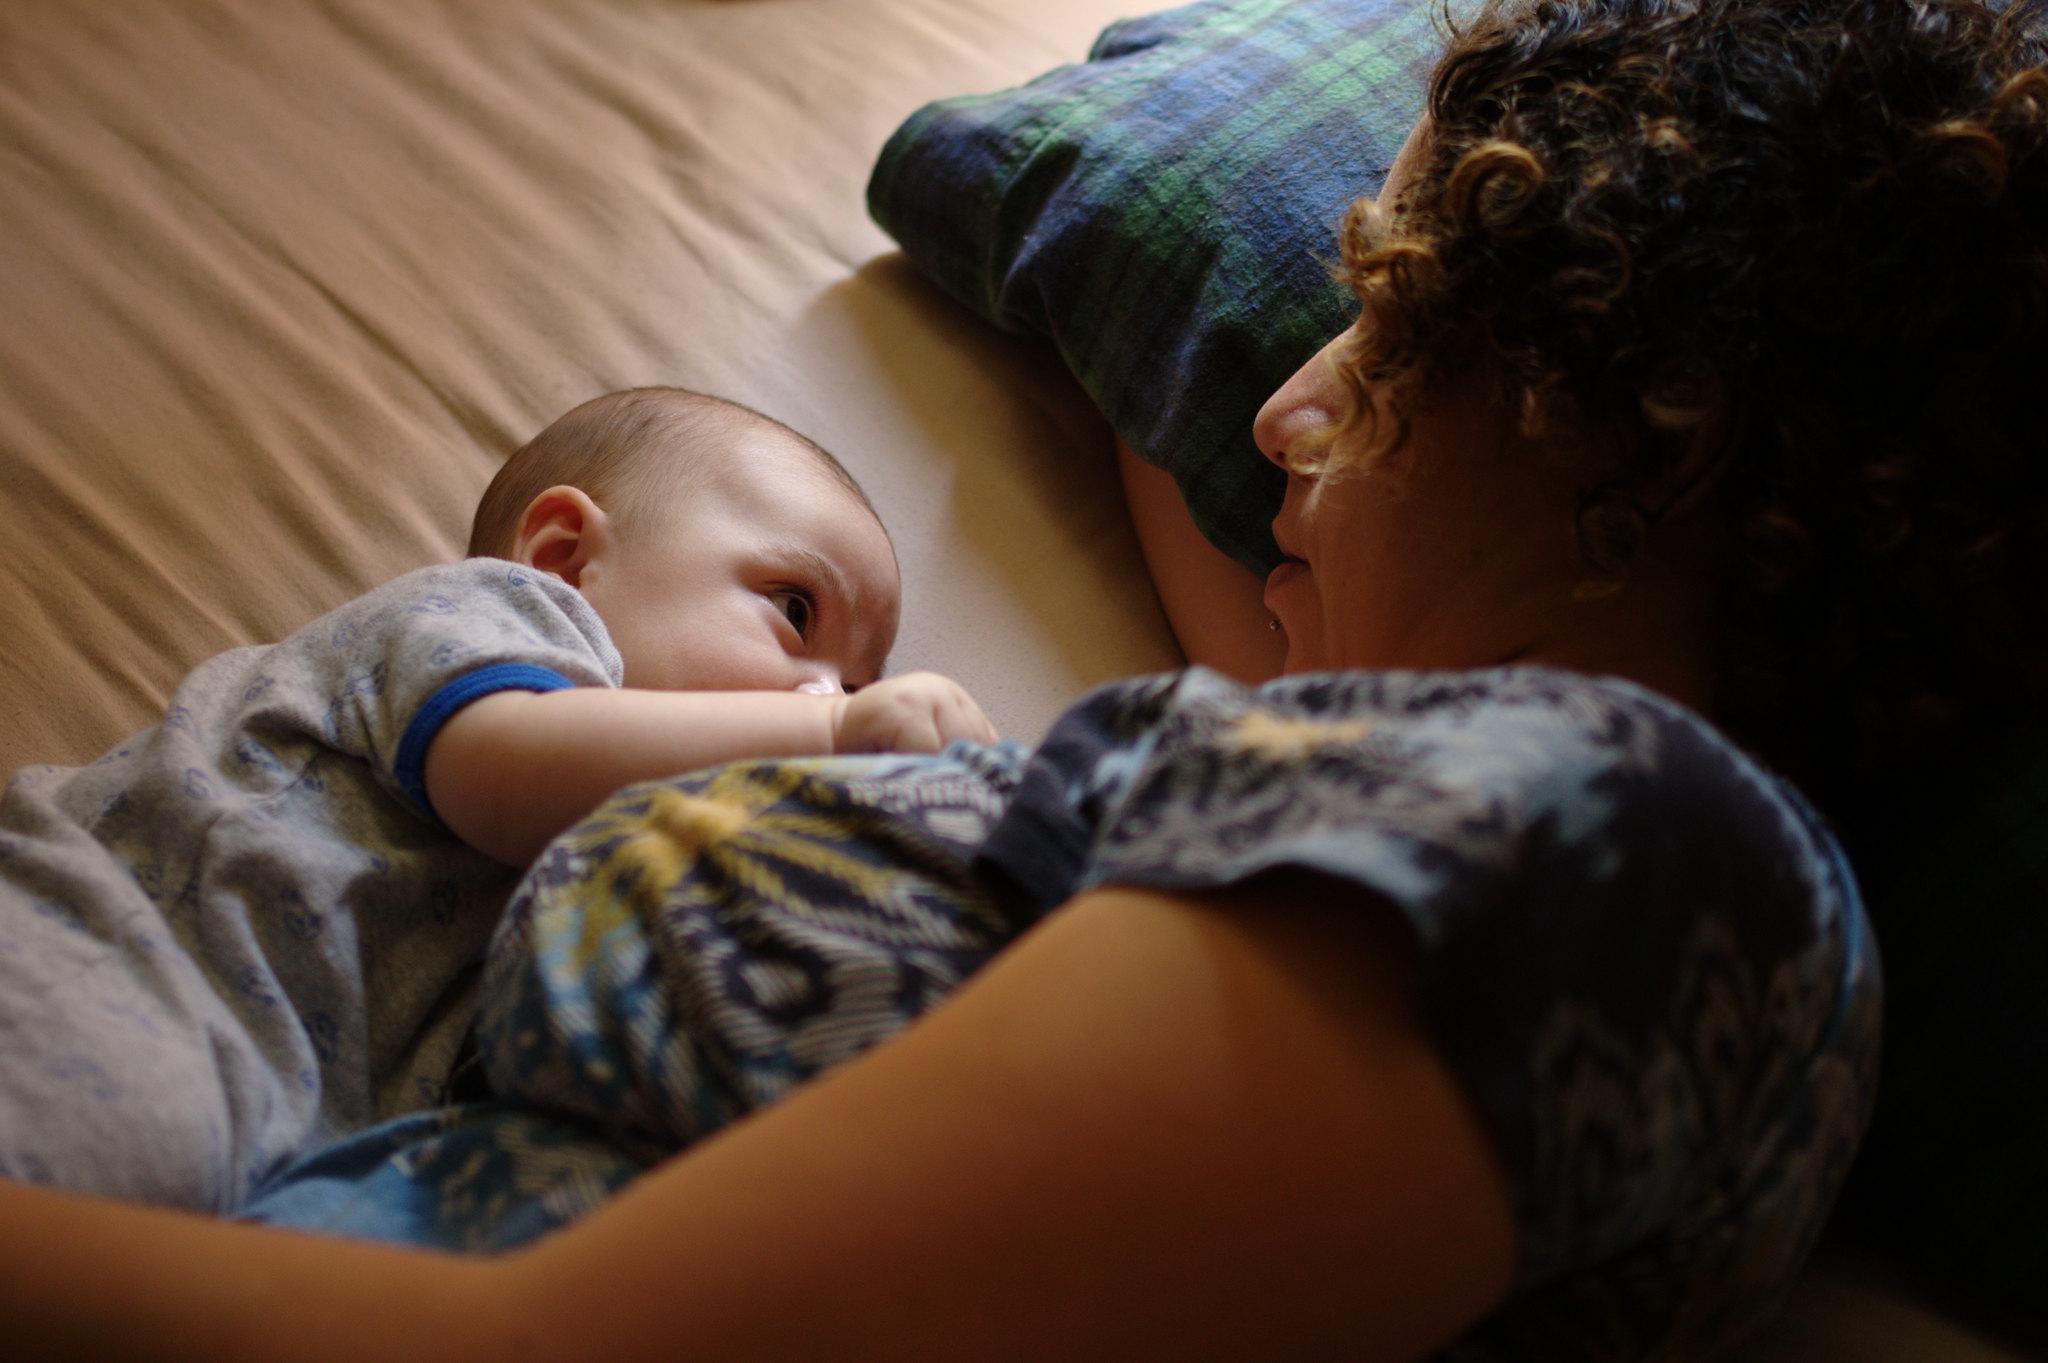 A mother is shown lying comfortably on her side, head propped up by a pillow, with her baby lying next to her and breastfeeding. Mother and baby are making eye contact.